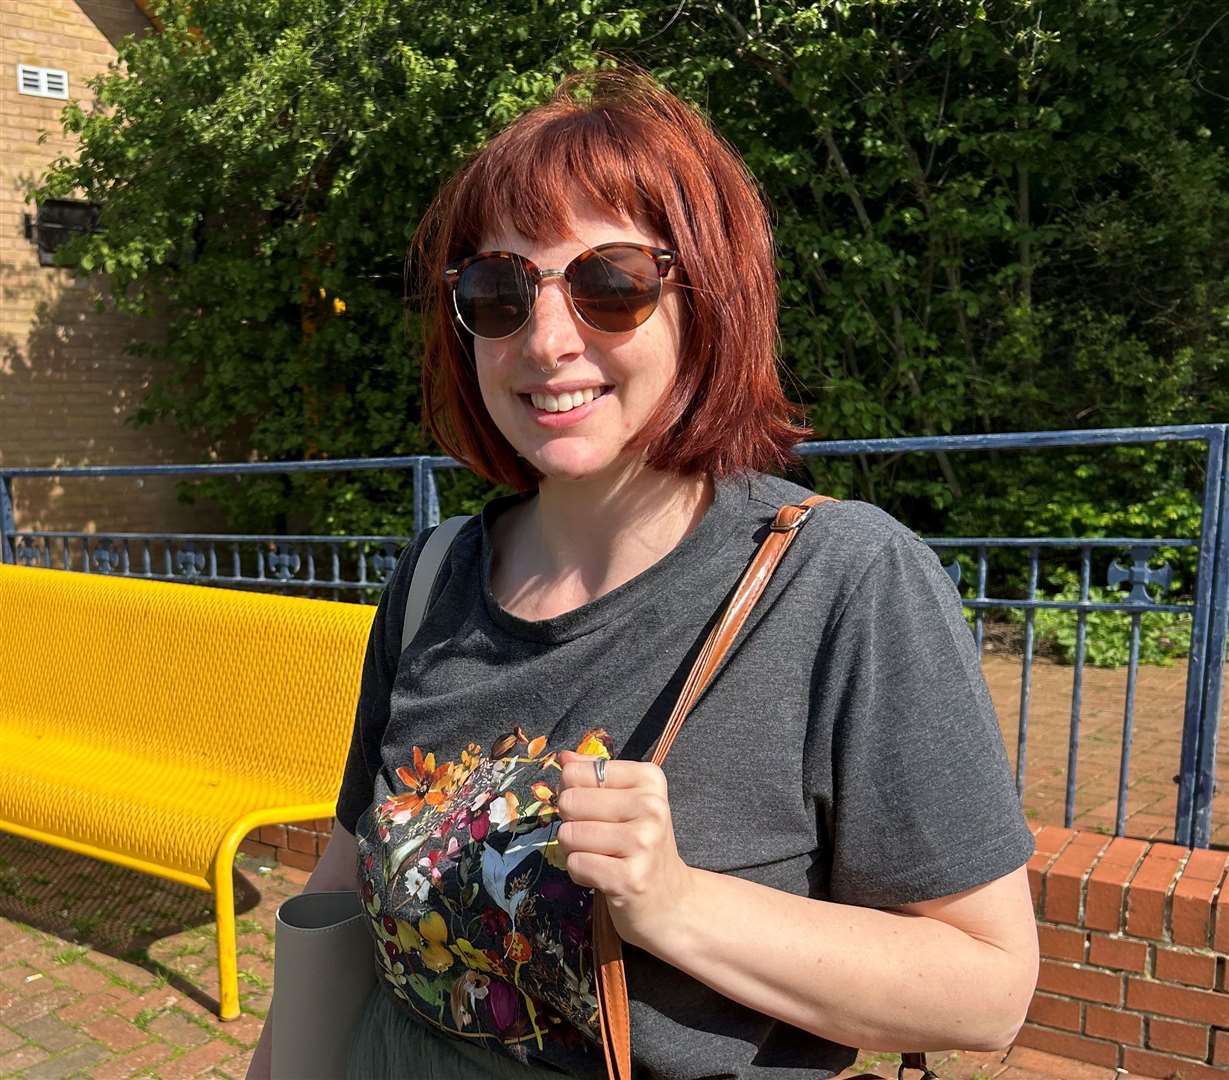 Nicola Morgan, 35, was glad to see the return of Sturry Park and Ride